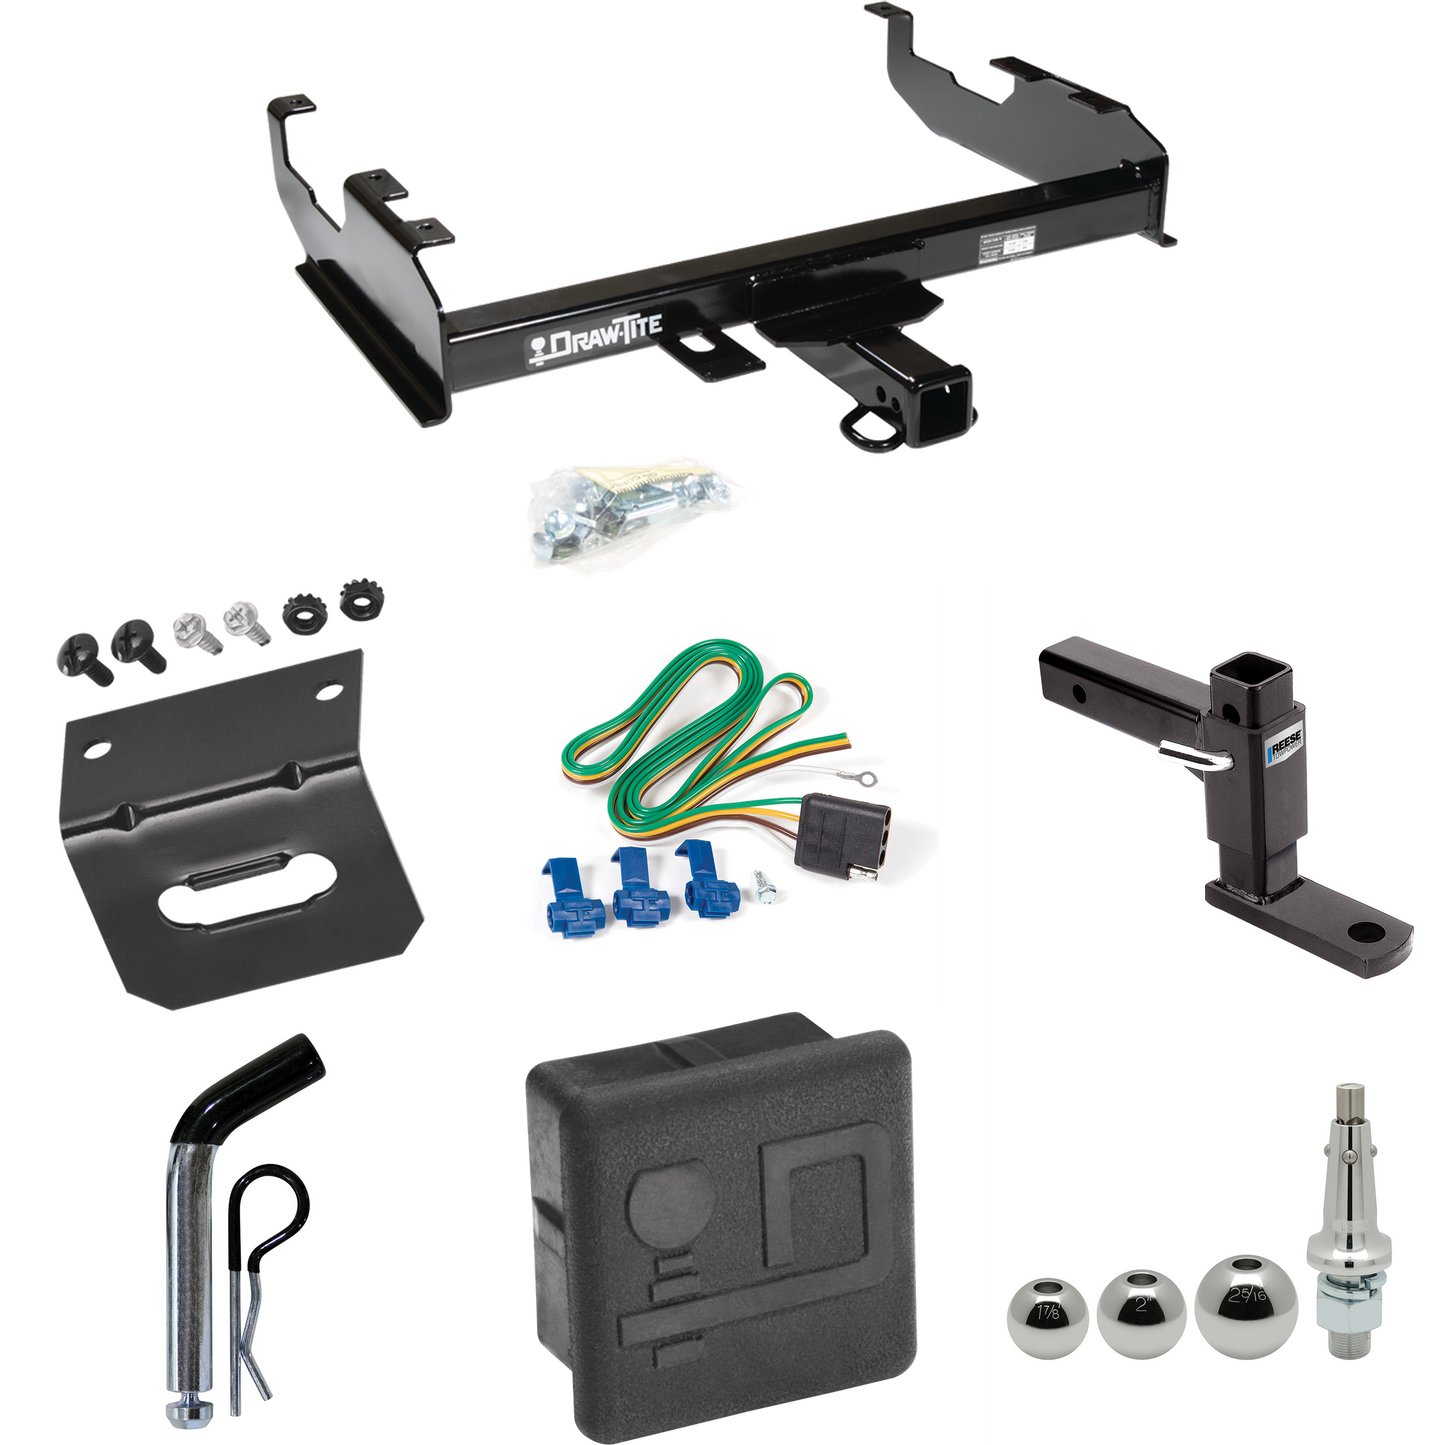 Fits 1963-1972 Chevrolet K20 Trailer Hitch Tow PKG w/ 4-Flat Wiring + Adjustable Drop Rise Ball Mount + Pin/Clip + Inerchangeable 1-7/8" & 2" & 2-5/16" Balls + Wiring Bracket + Hitch Cover (For w/8' Bed Models) By Draw-Tite